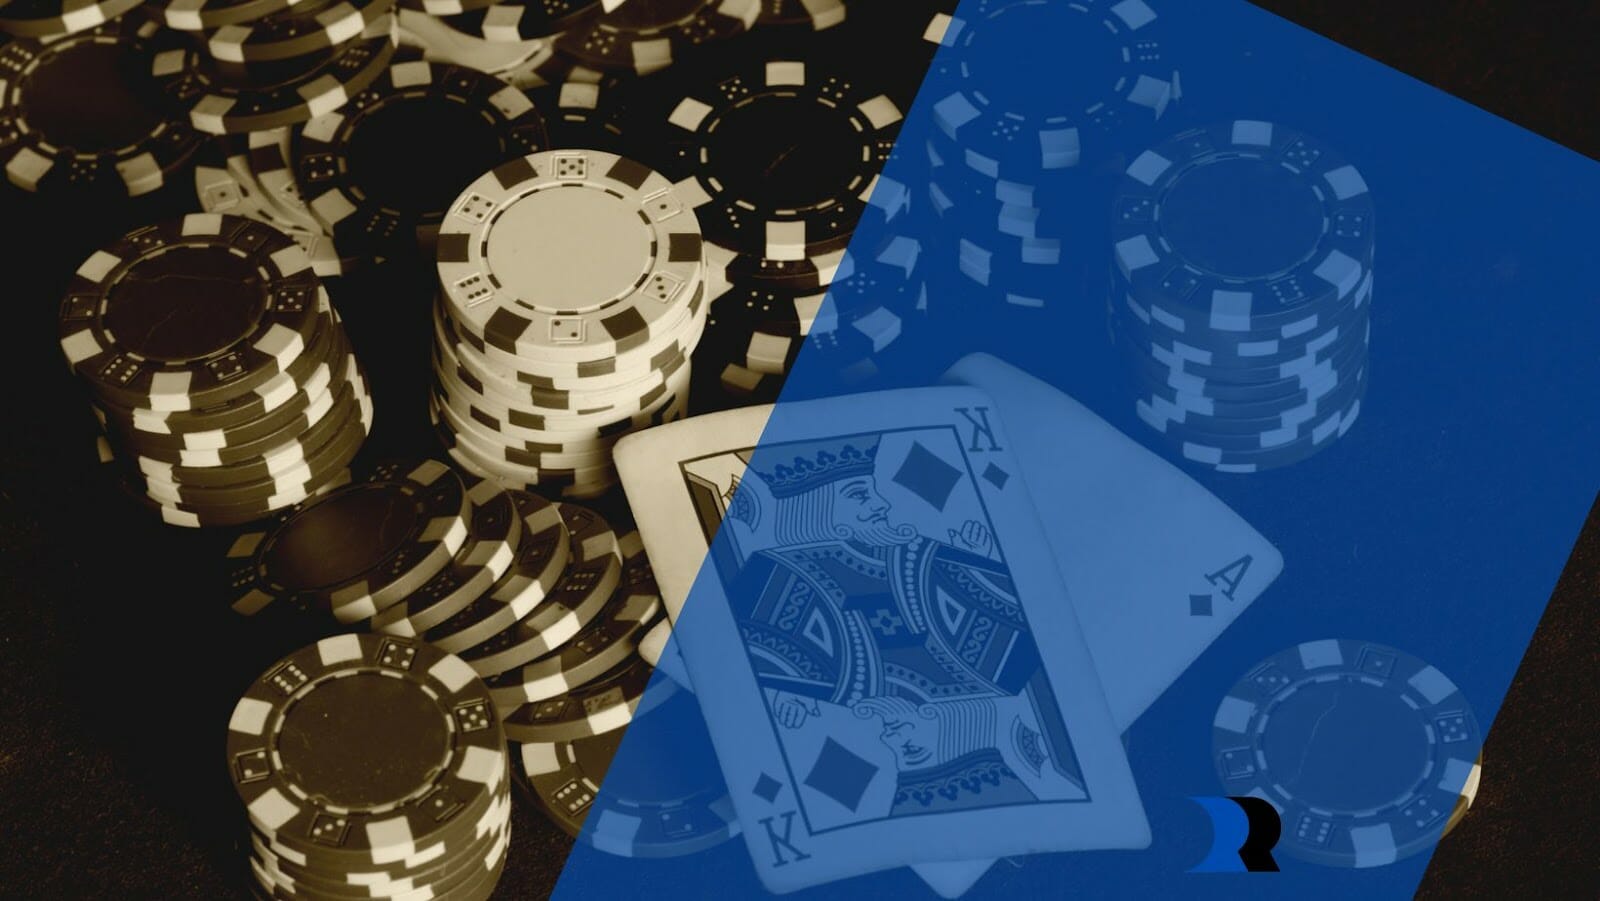 Is it Safe to Make Deposits and Play Casino Games on a Mobile Phone?